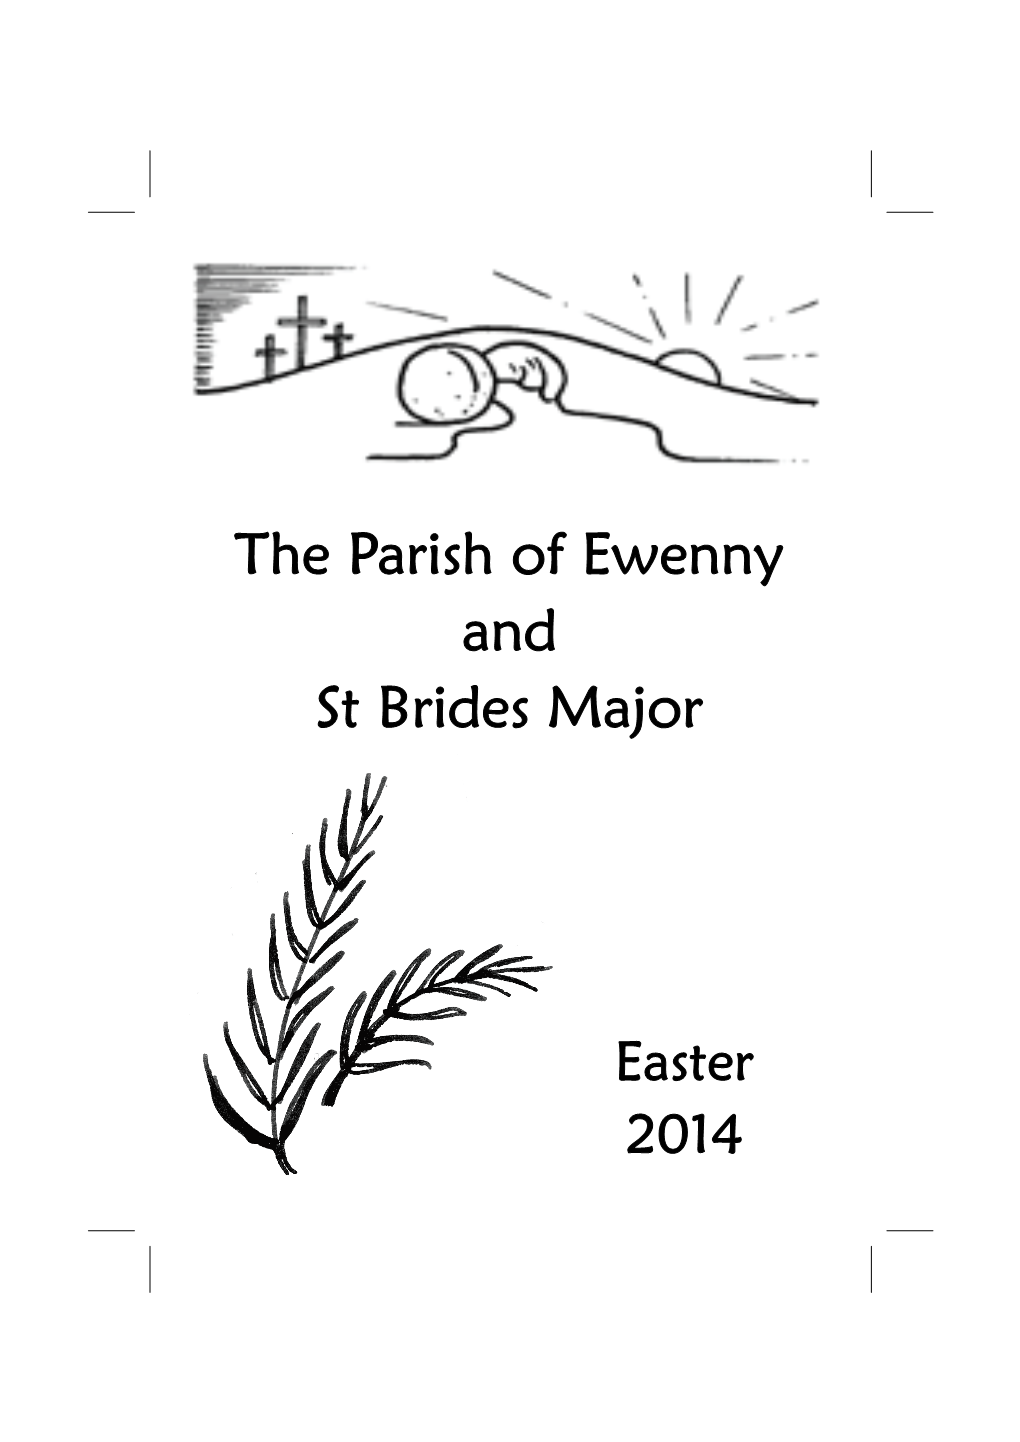 The Parish of Ewenny and St Brides Major